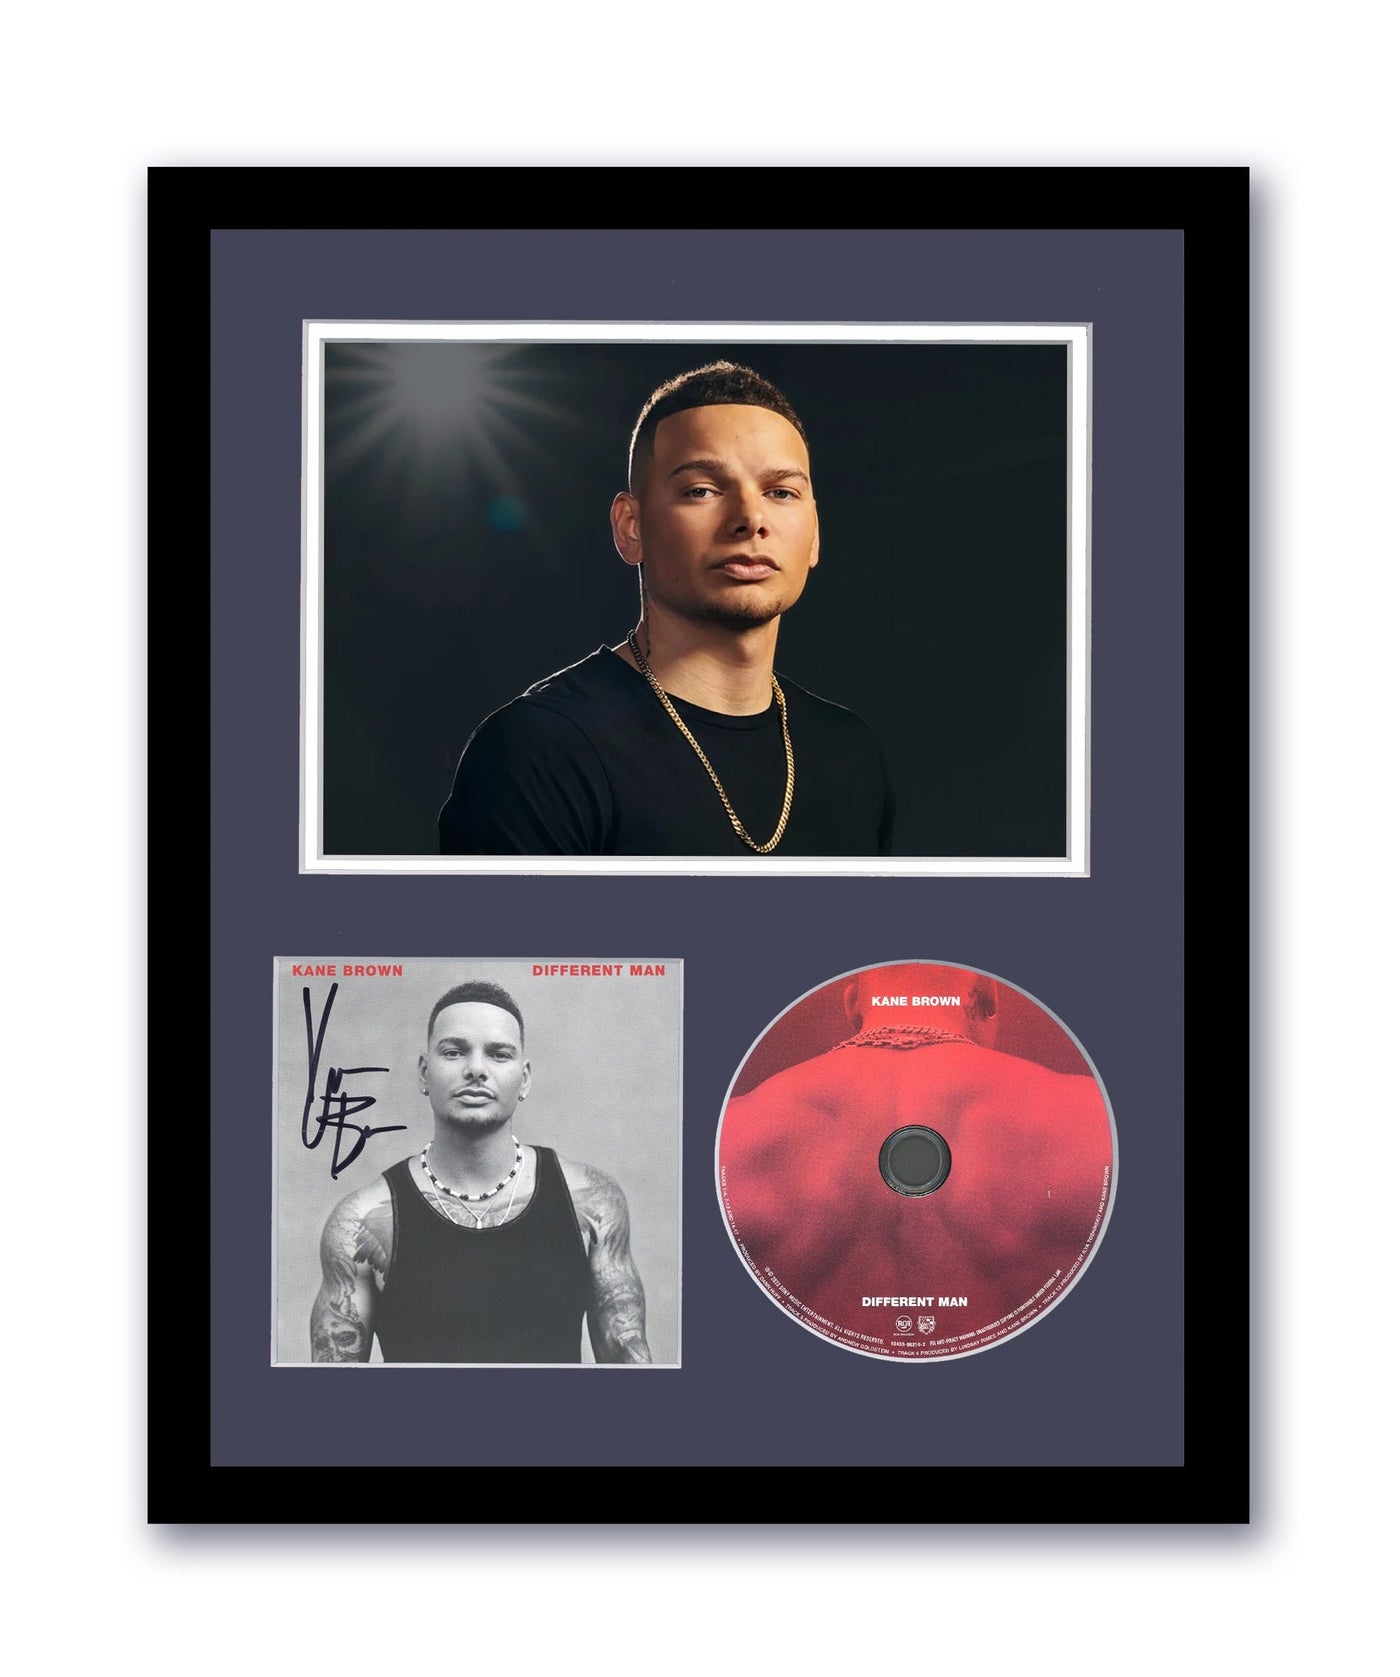 Kane Brown Autographed 11x14 Custom Framed CD Different Man Country Music ACOA